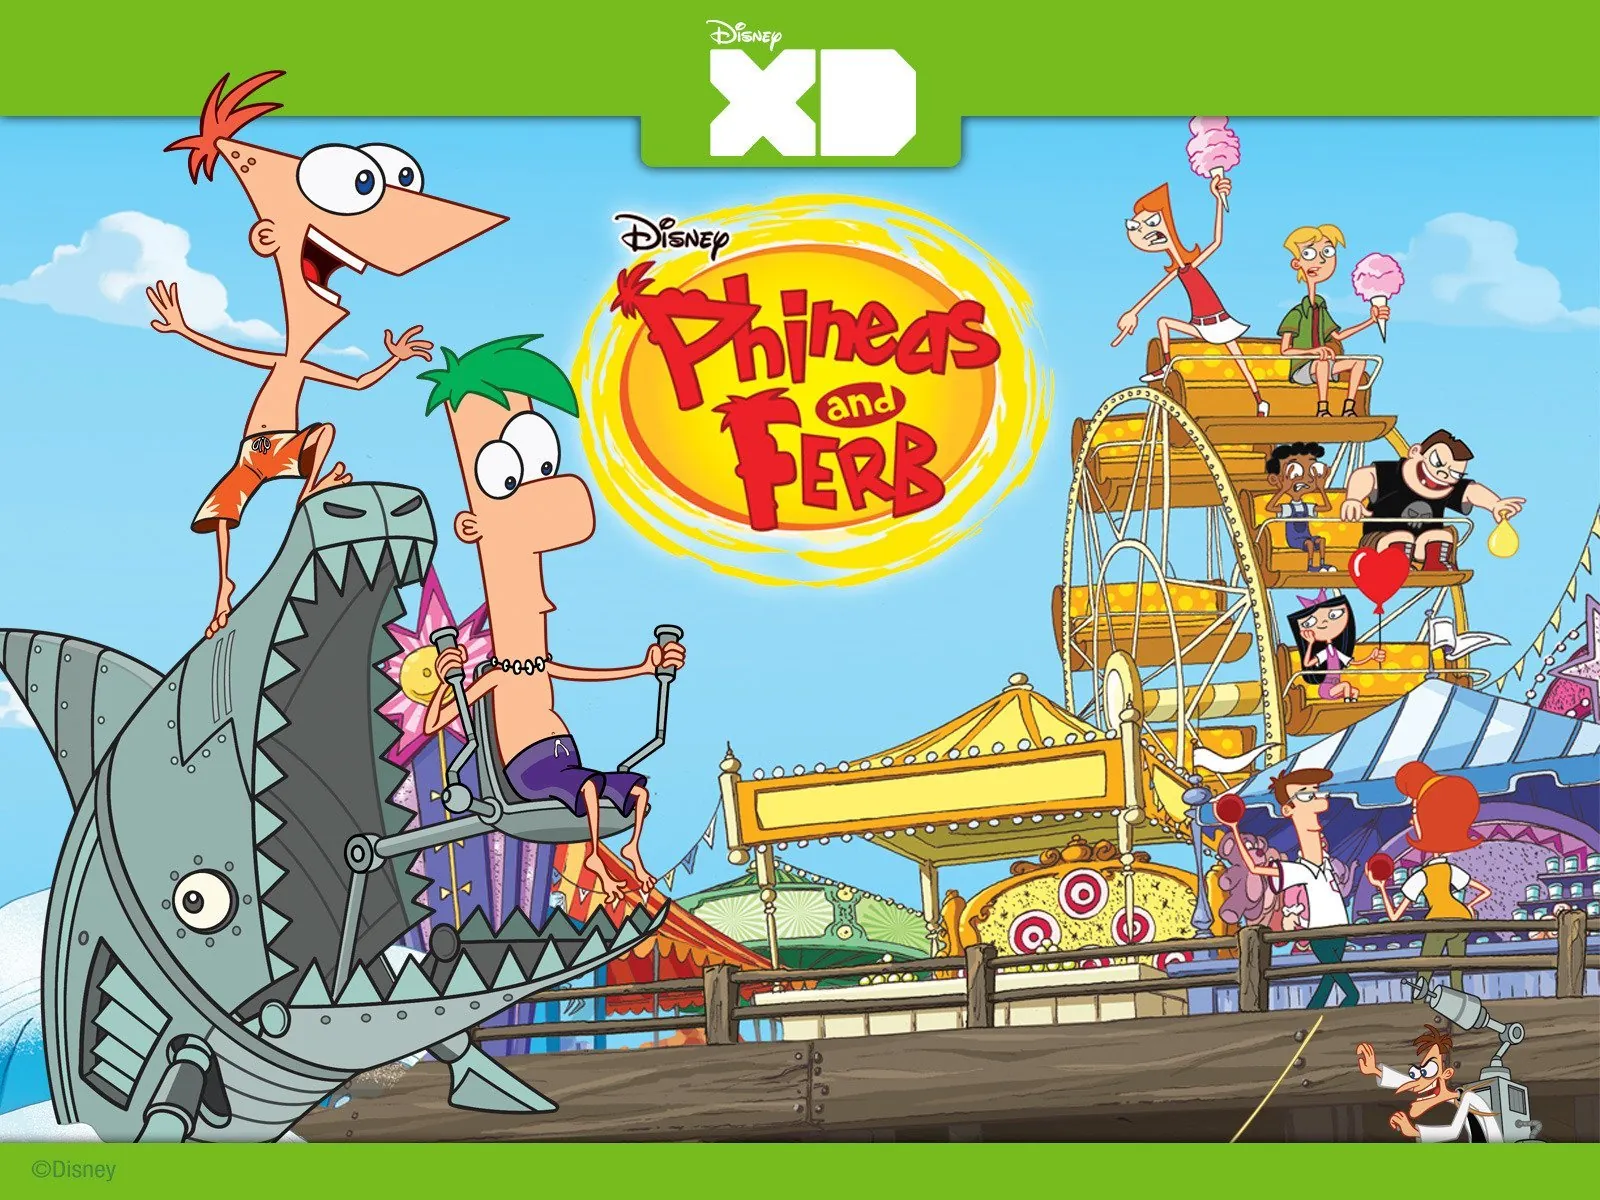 Phineas and Ferb Season 4 Hindi Dubbed Episodes Download 720p HD Rare Toons India